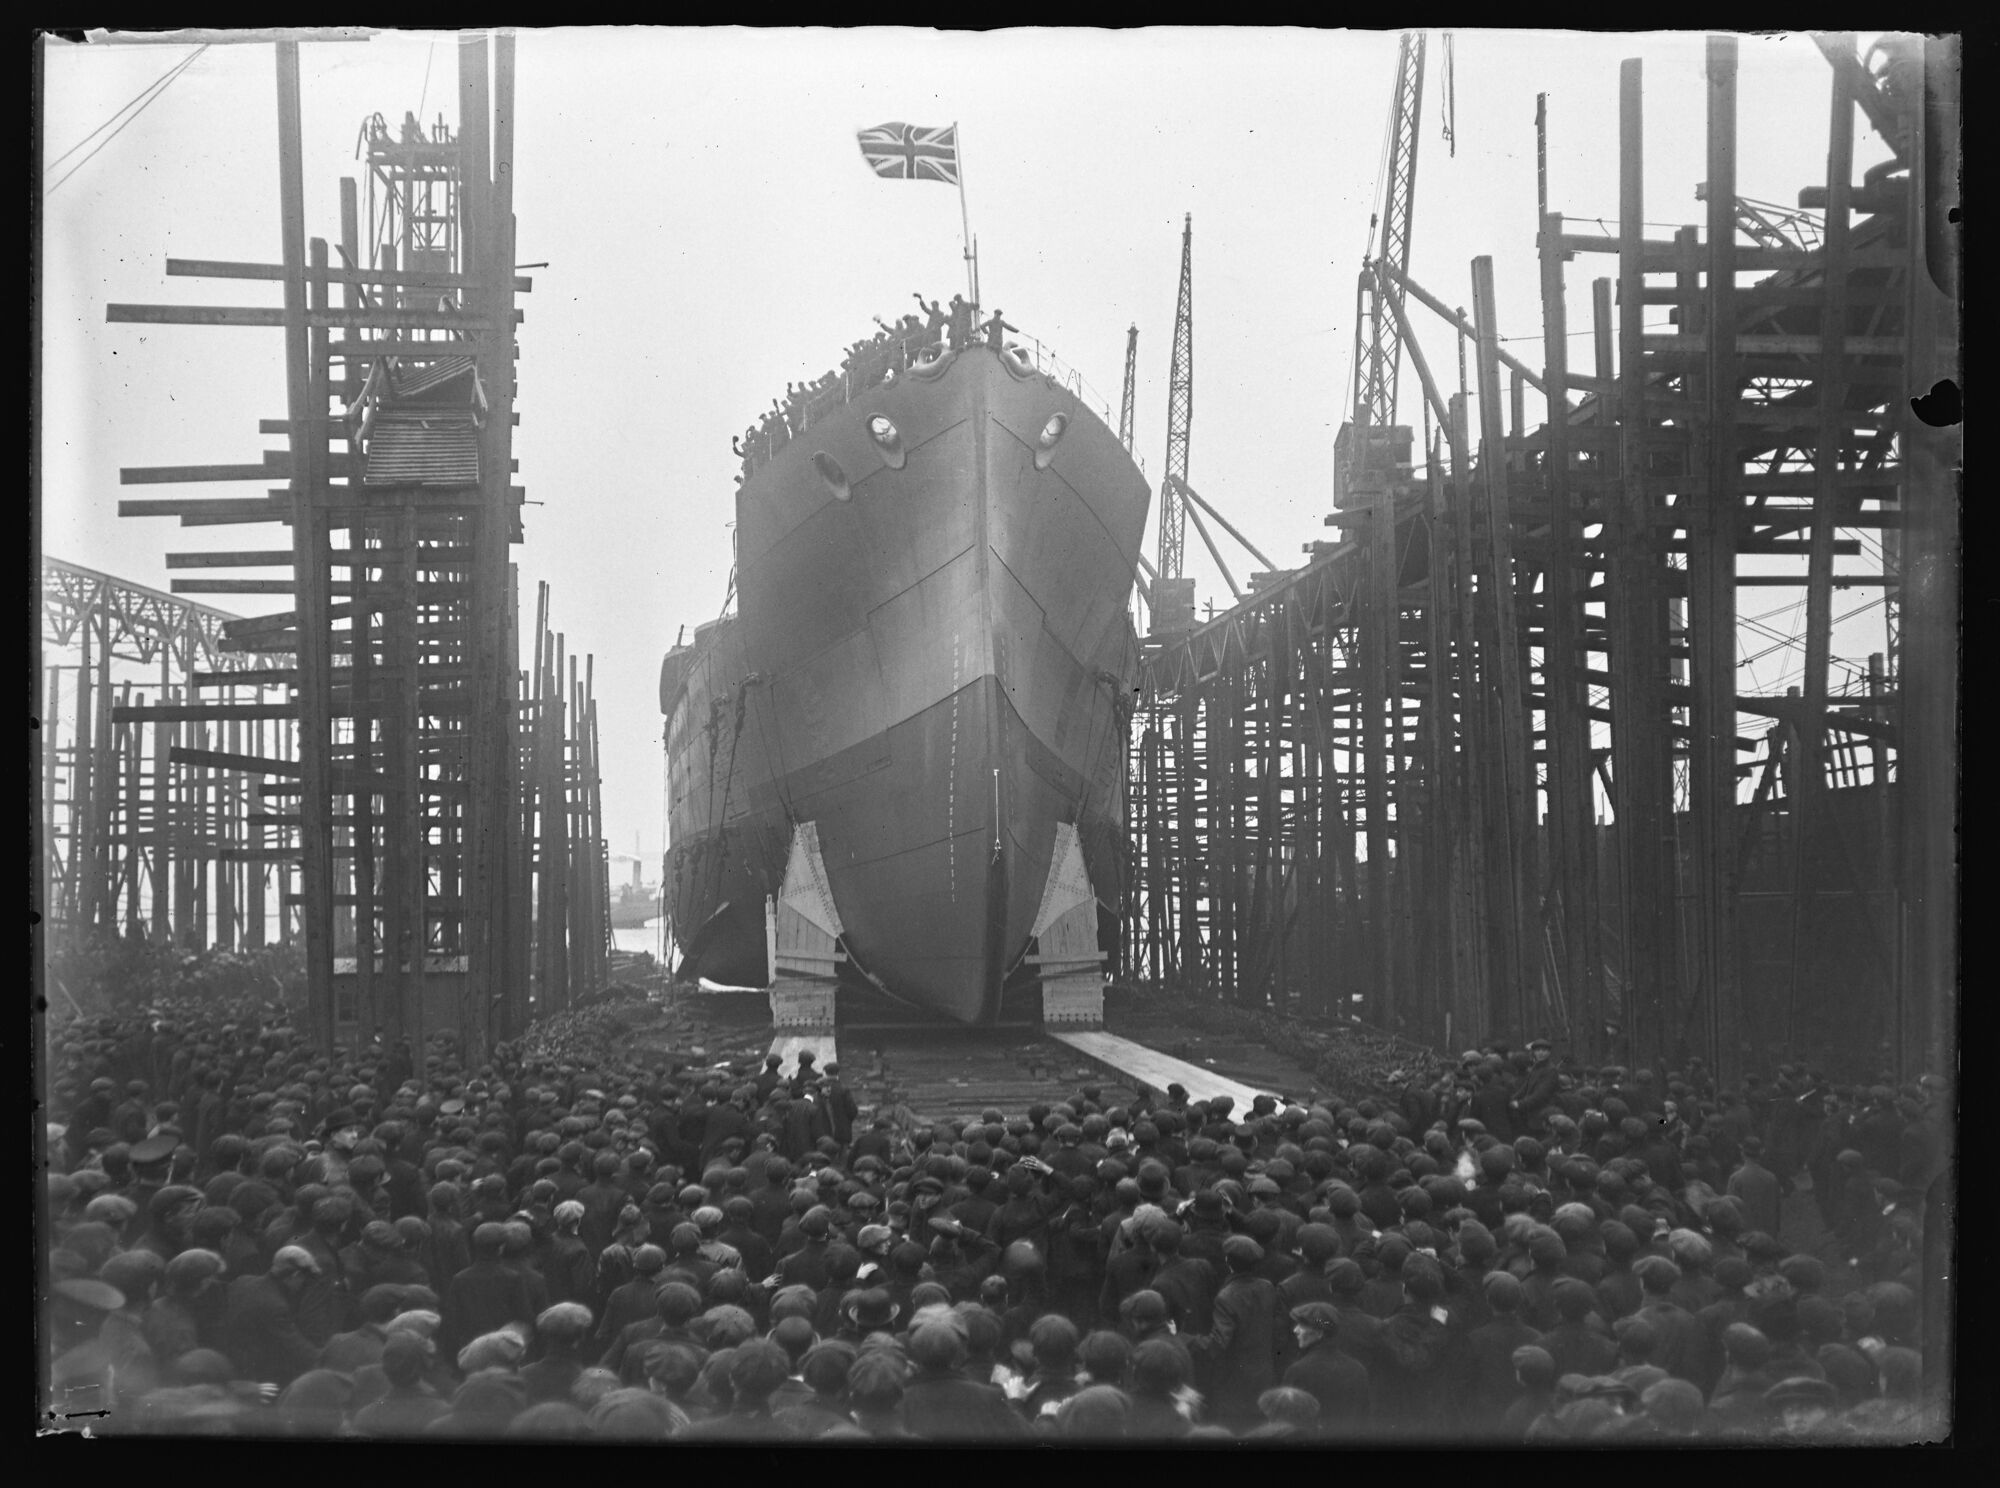 Launch of HMS Emperor of India, Barrow-in-Furness